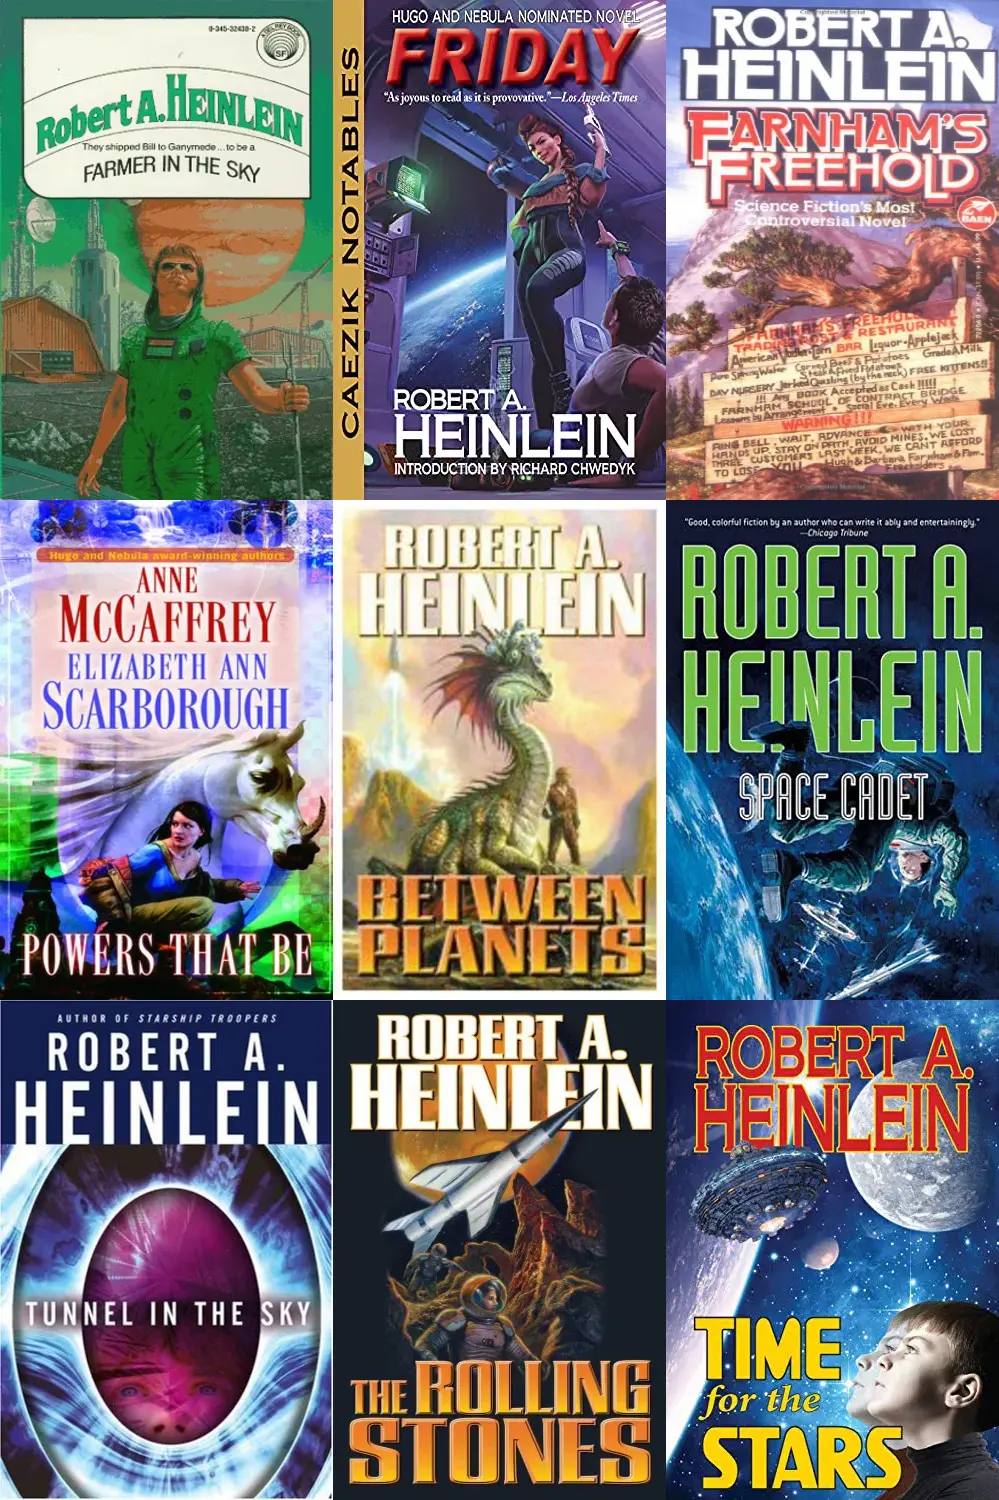 If I liked Citizen of the Galaxy by Robert A. Heinlein, what should I read  next?